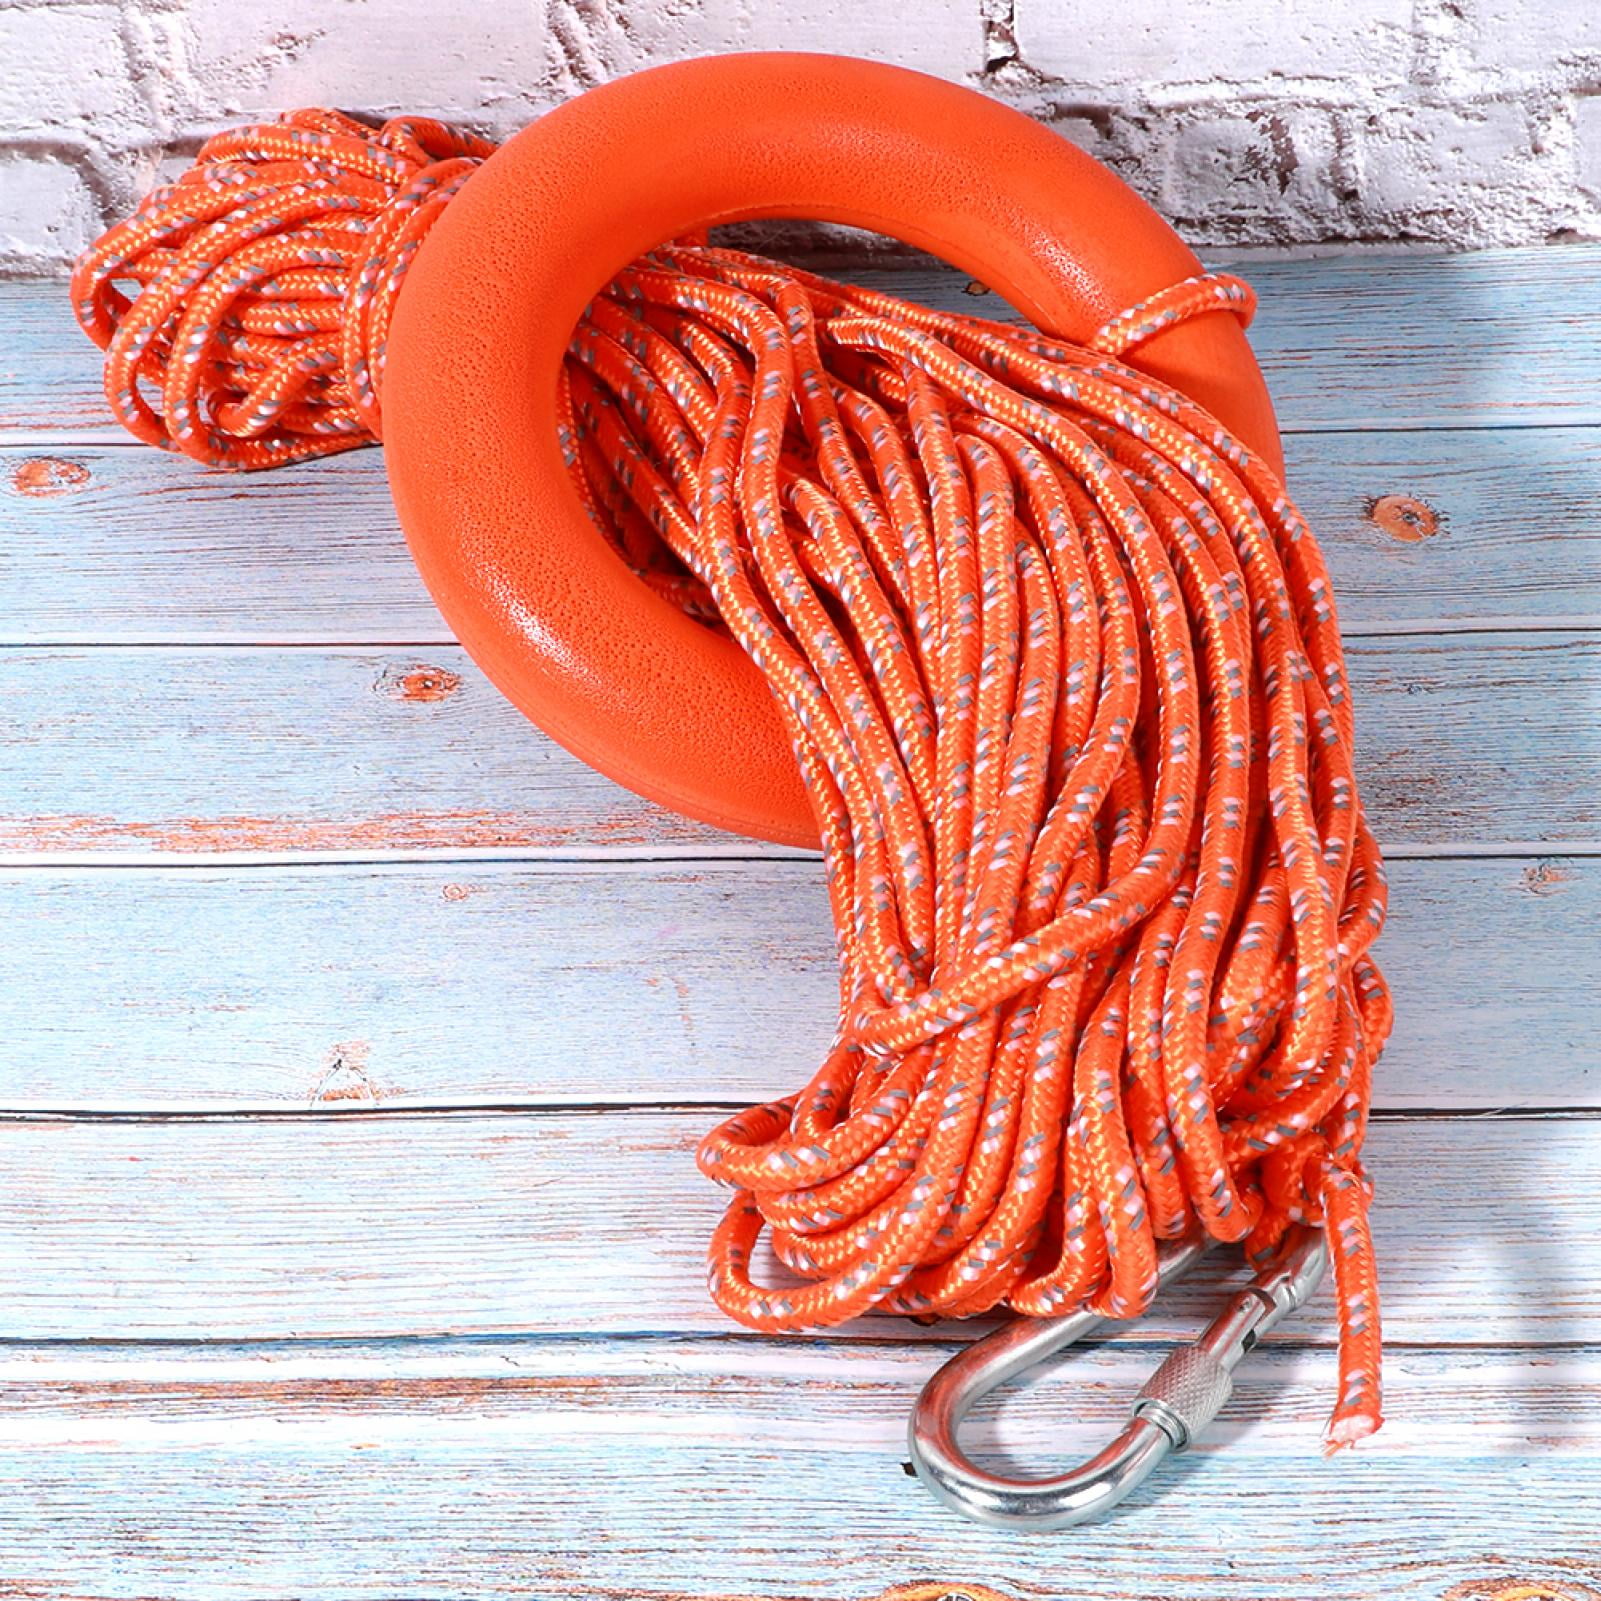 Details about   Lifesaving Ropes 6MM Diameter 30M Reflective PVC Lifesaving Rope With Hook Rings 